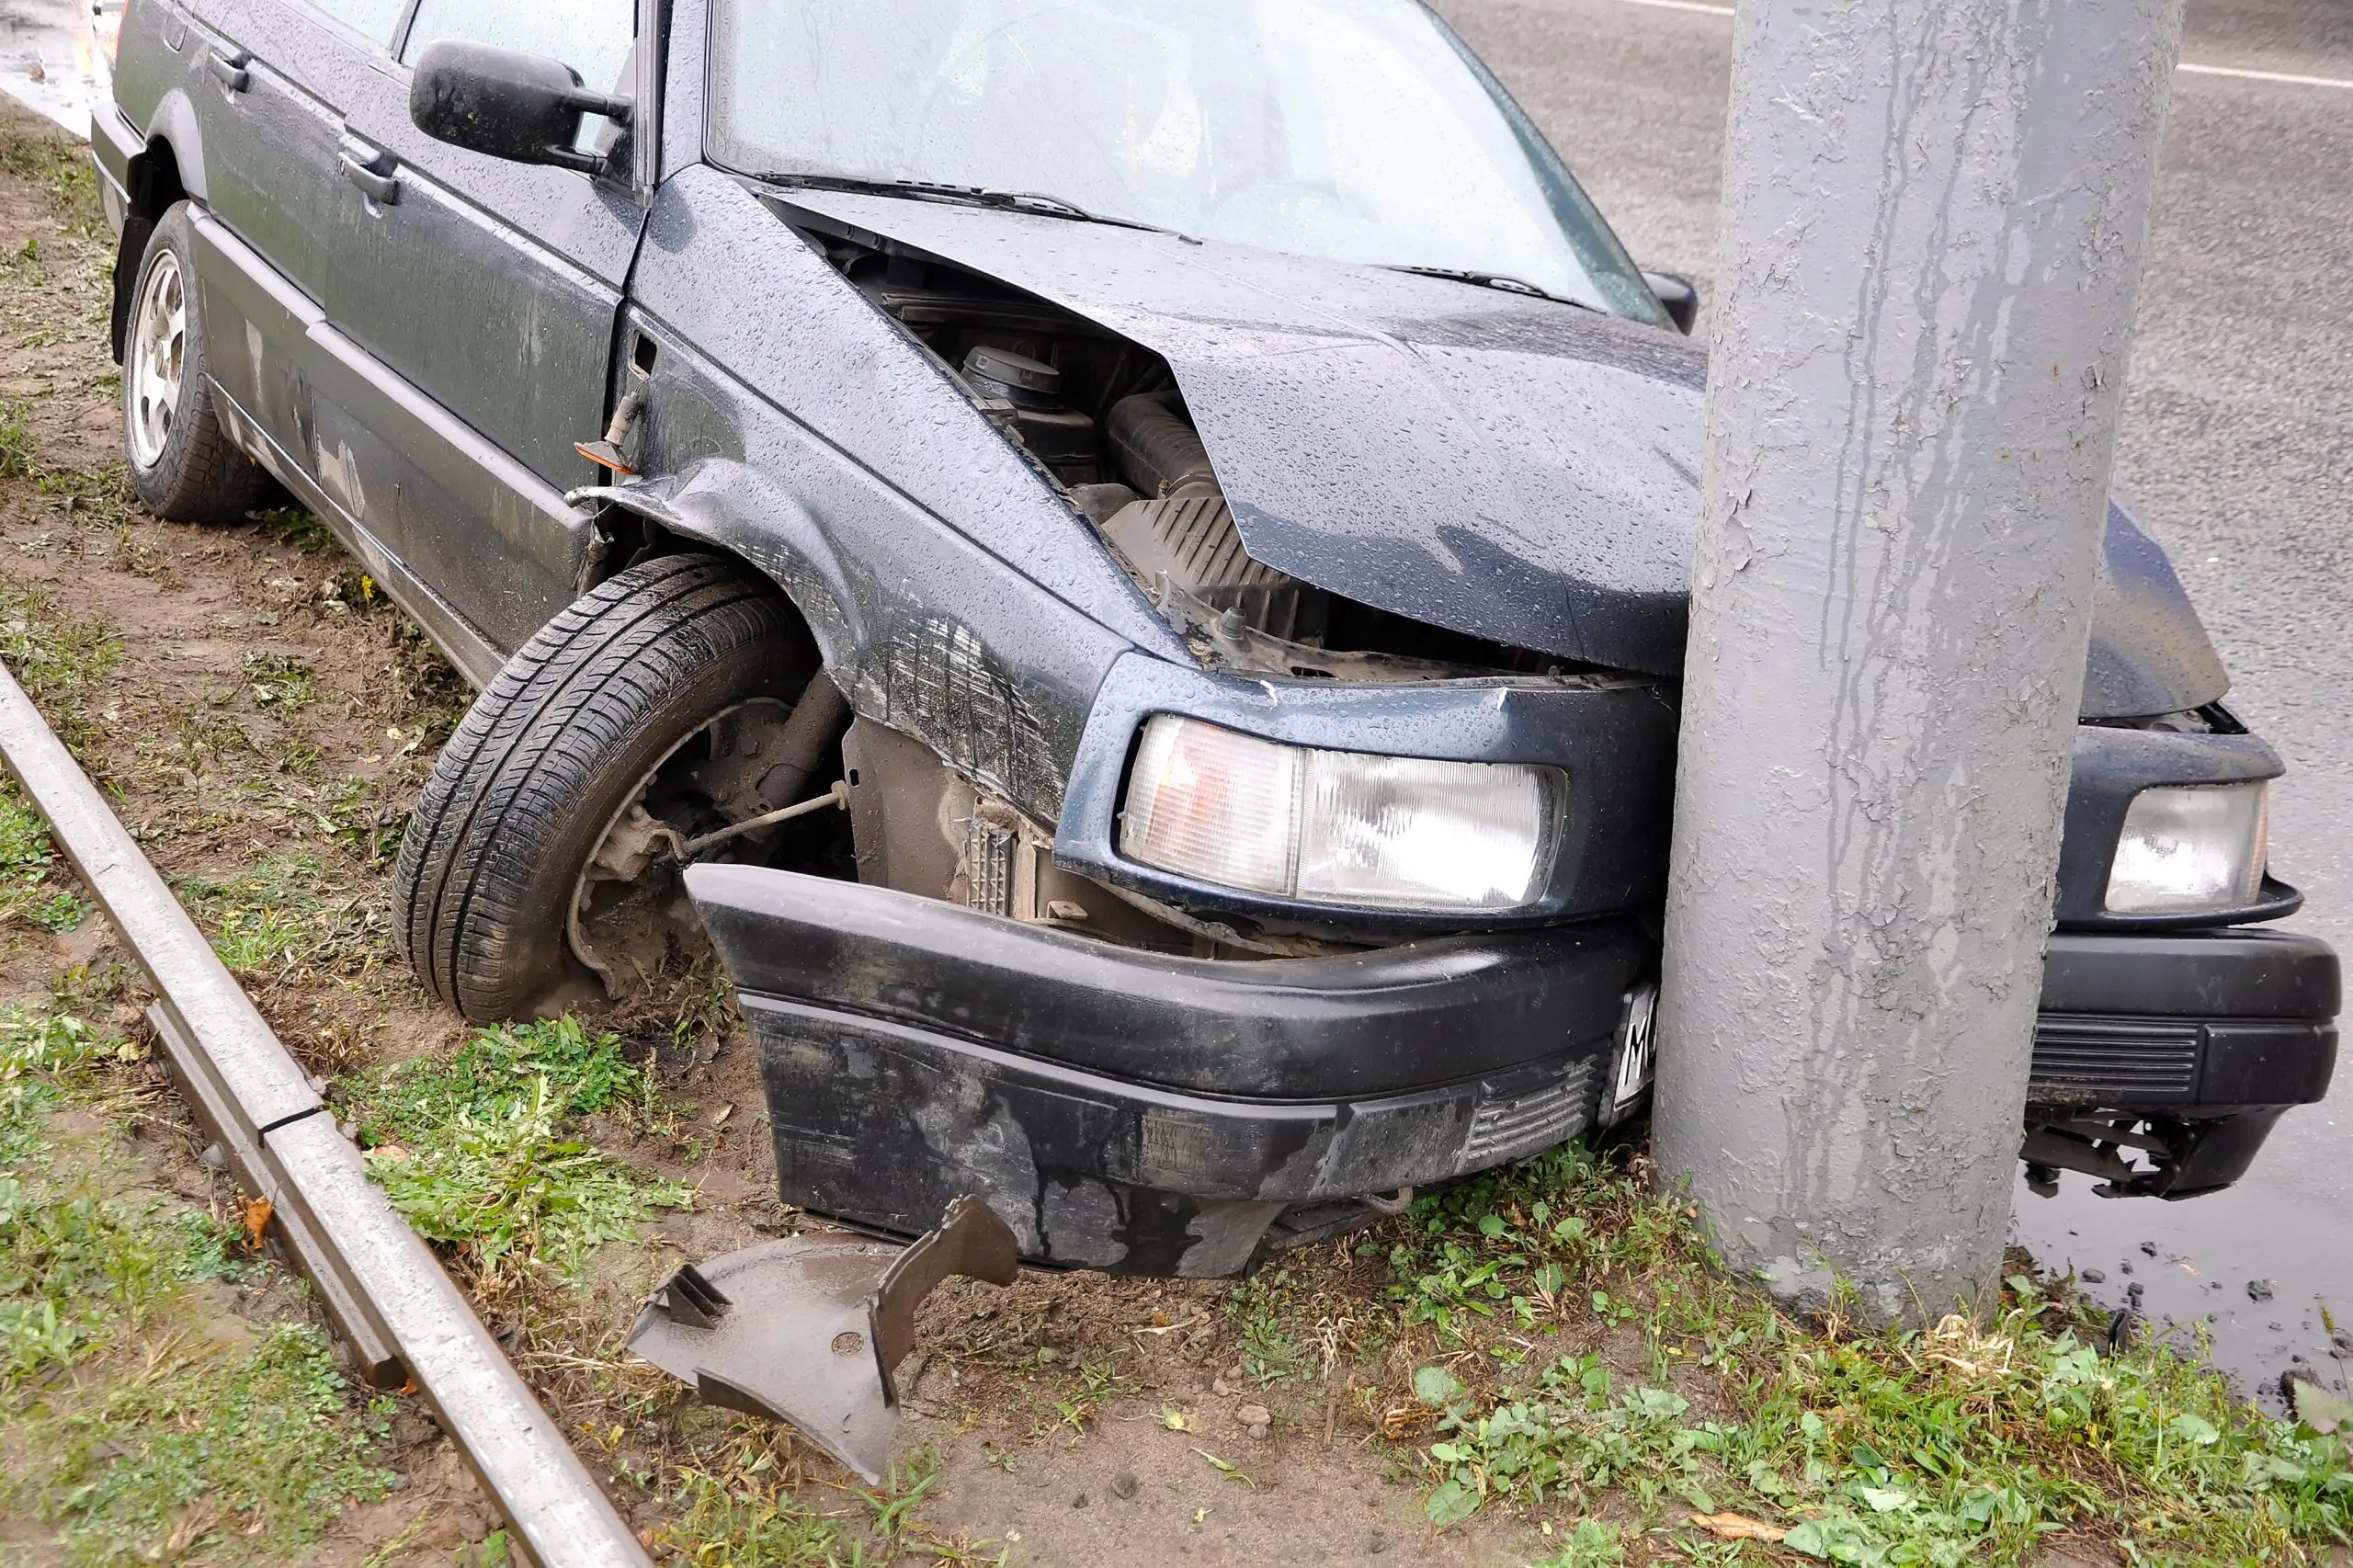 victims of single car accidents helped by injury lawyers to gain compensation for injuries